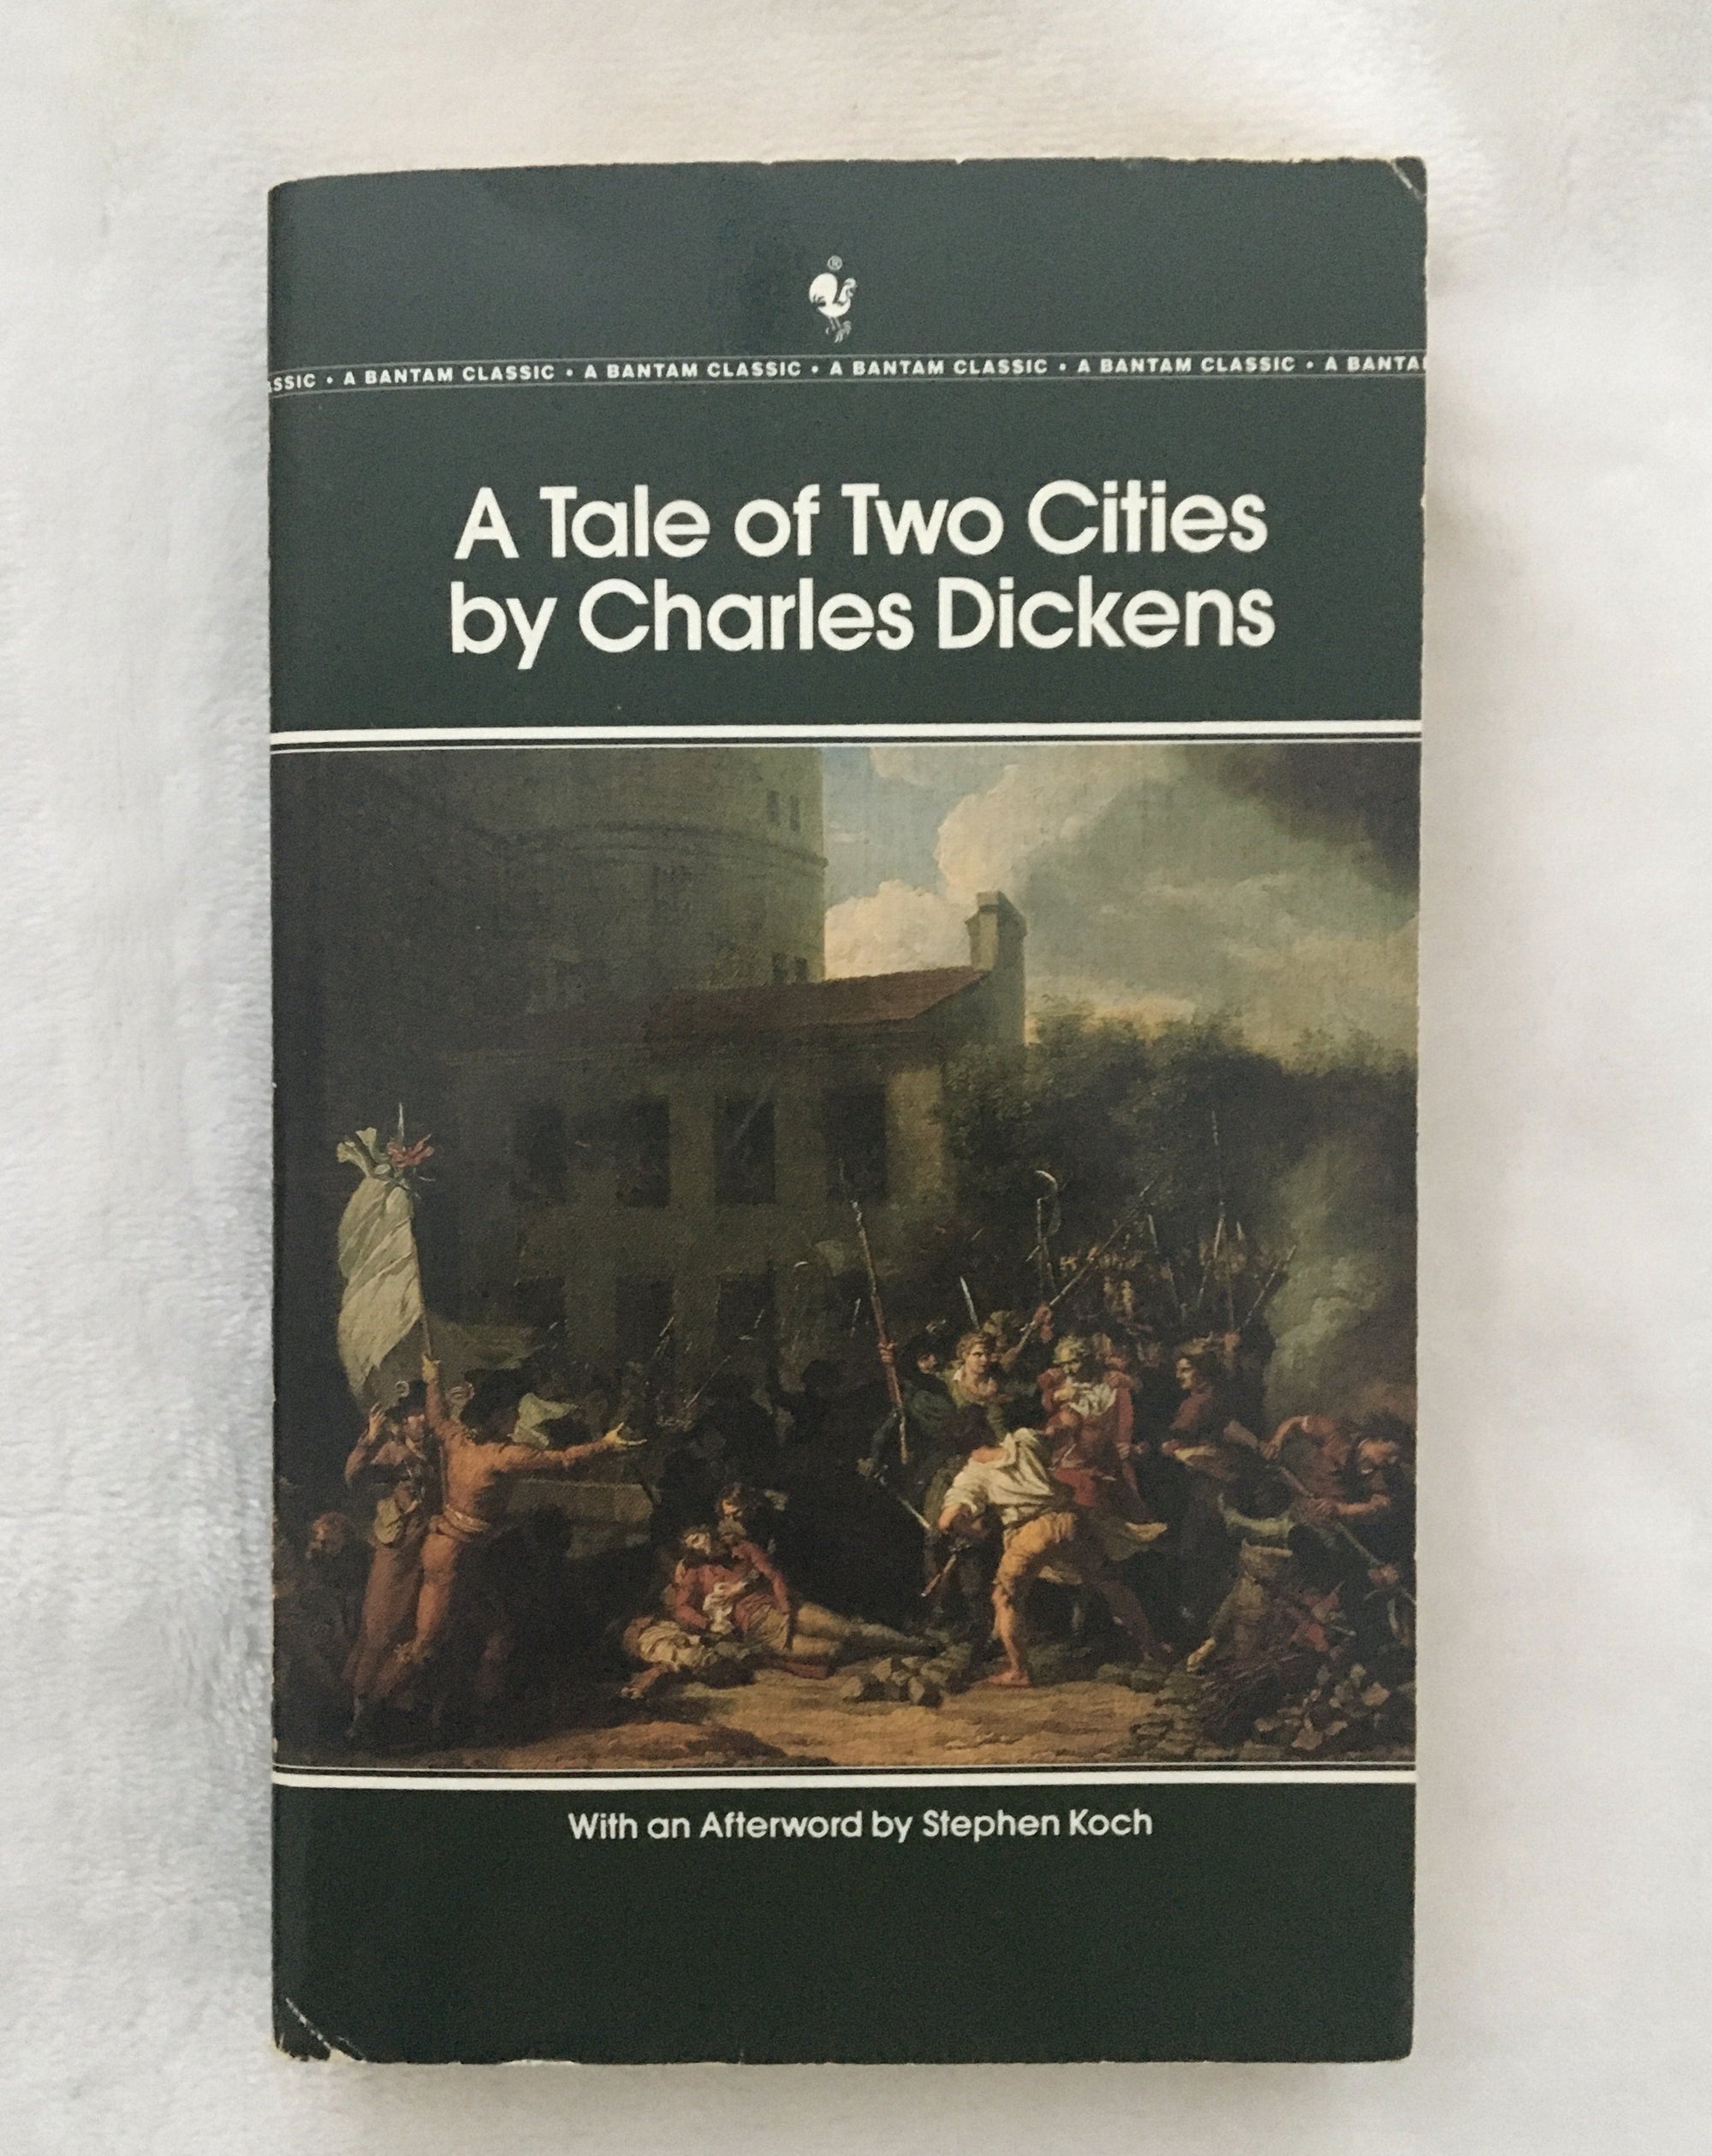 A Tale of Two Cities by Charles Dickens, book, Ten Dollar Books, Ten Dollar Books